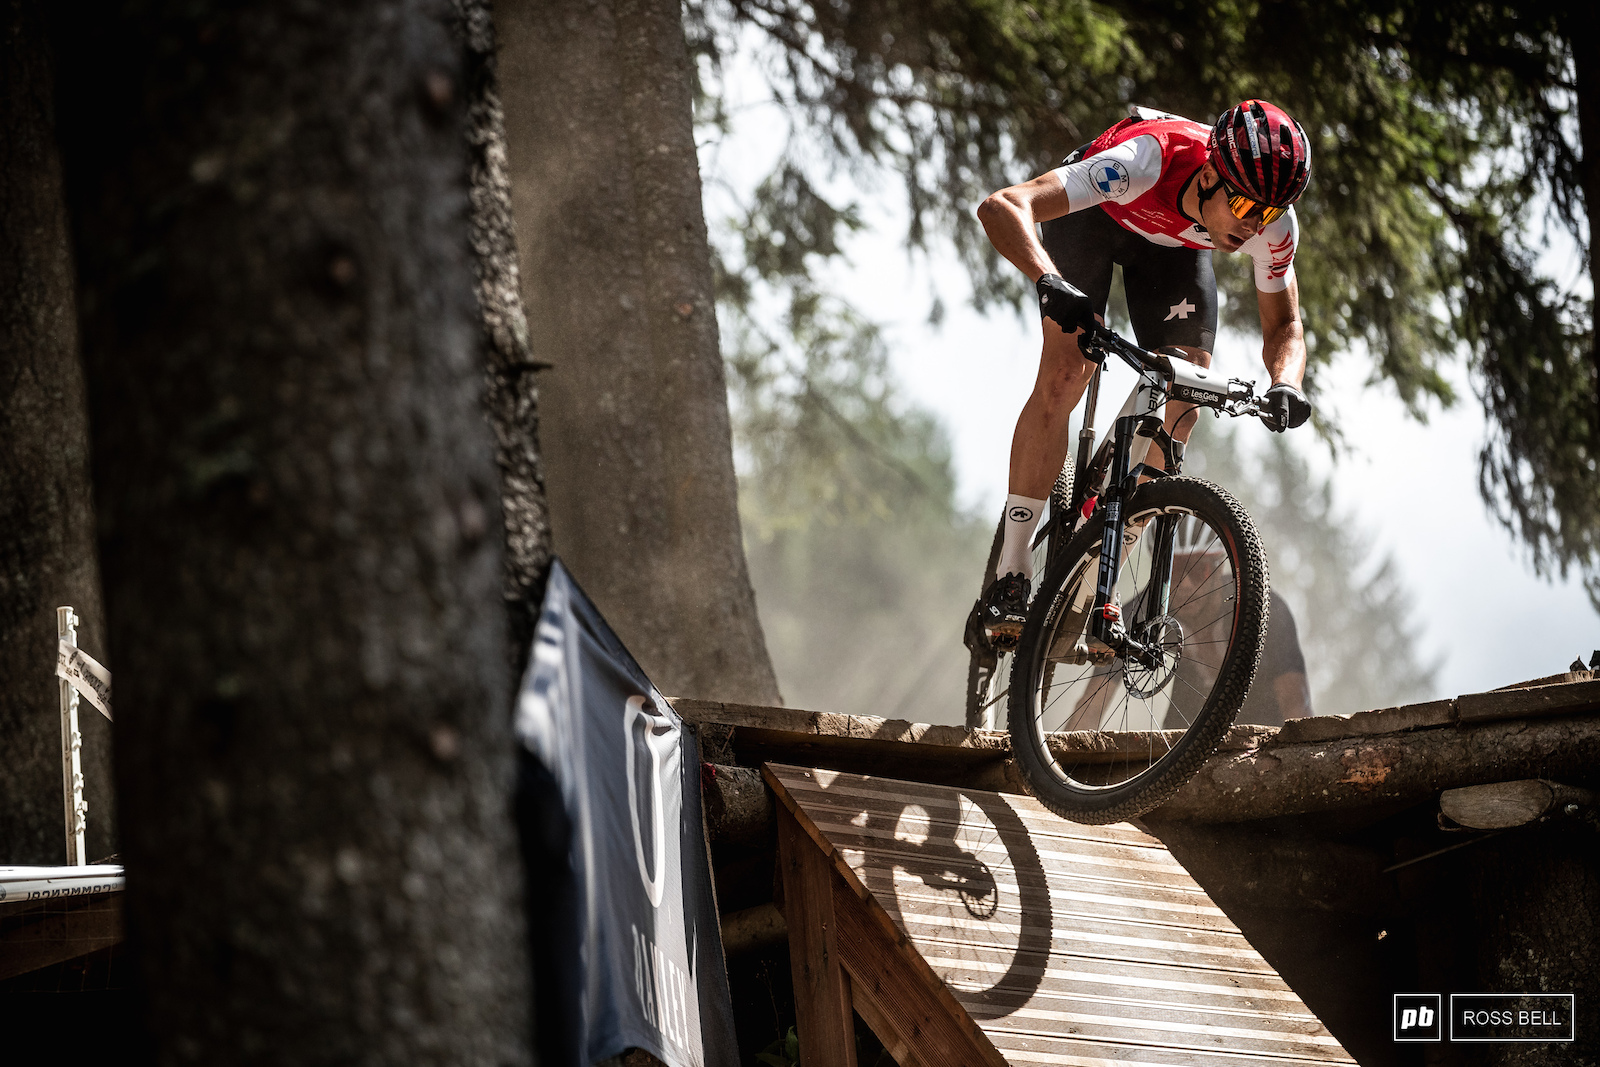 Filippo Colombo couldn t quite match his XCO medal performance but 9th is still a great ride.